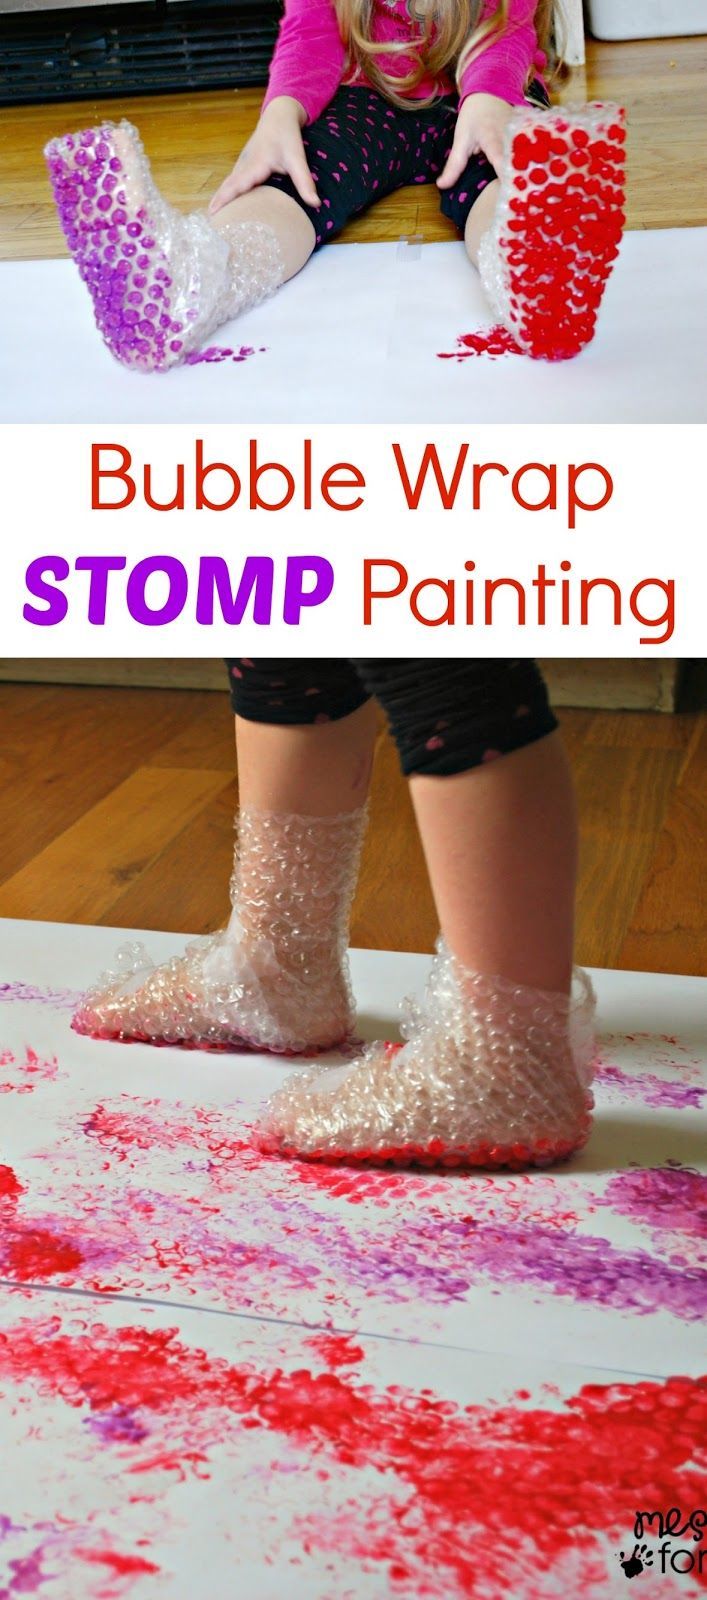 Bubble Wrap Stomp Painting | Mess For Less